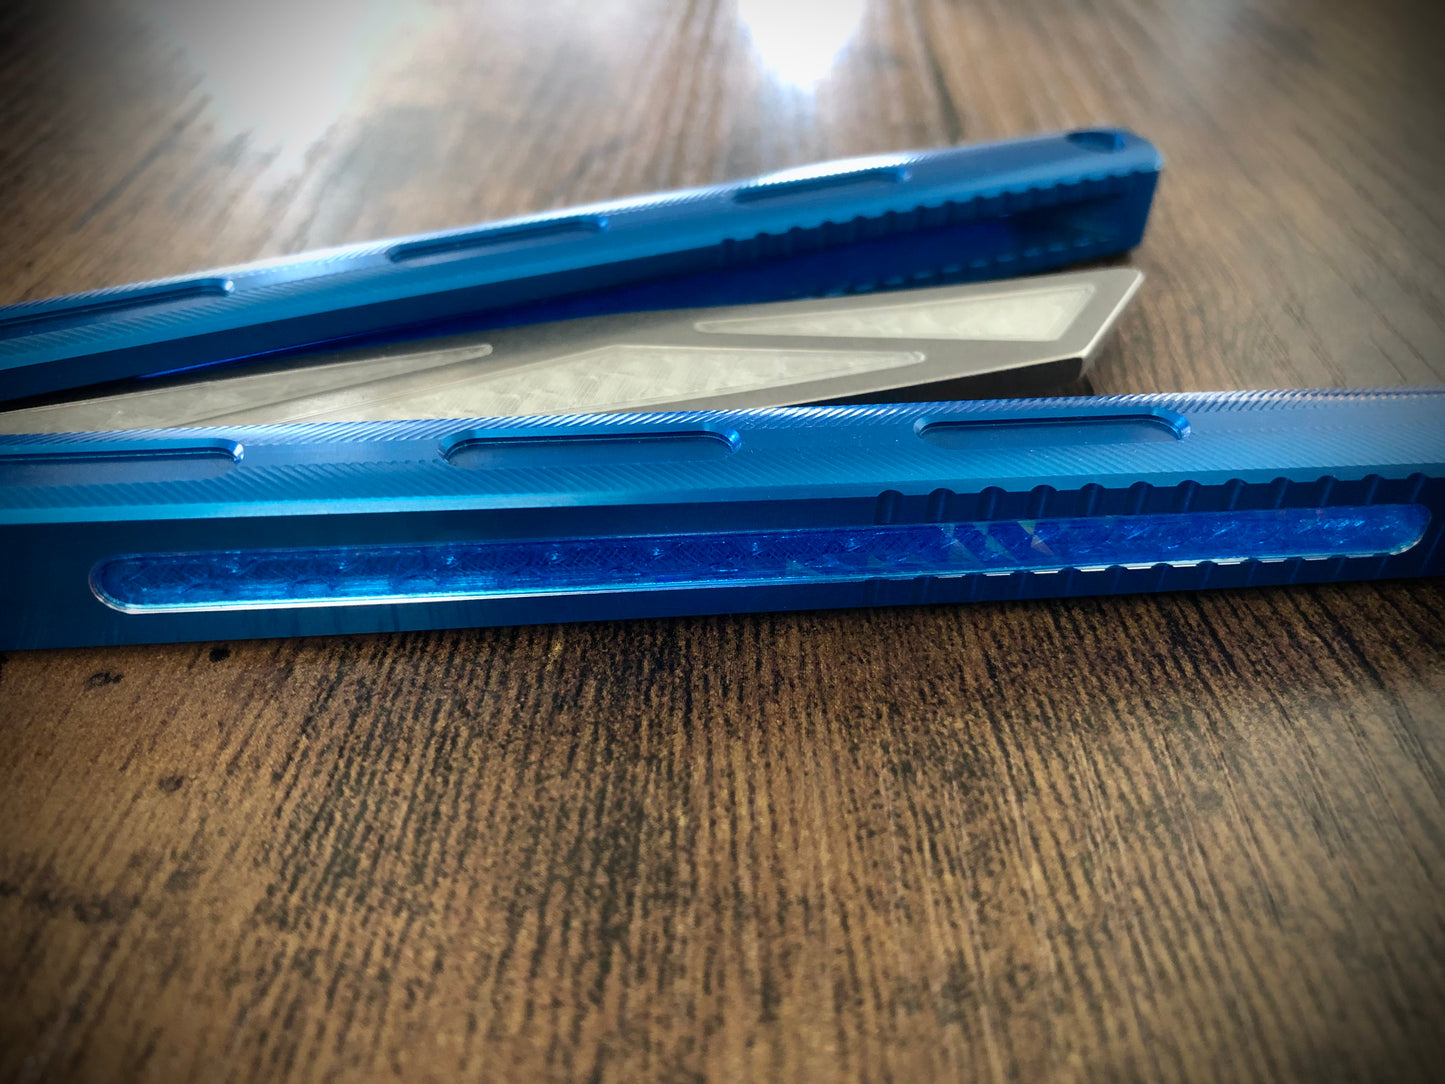 Add a pop of color and silence the ring of your MachineWise Prysma, Prysma Pro, or SlifT balisongs with these these polyurethane Zippy Speed Channel inlays.